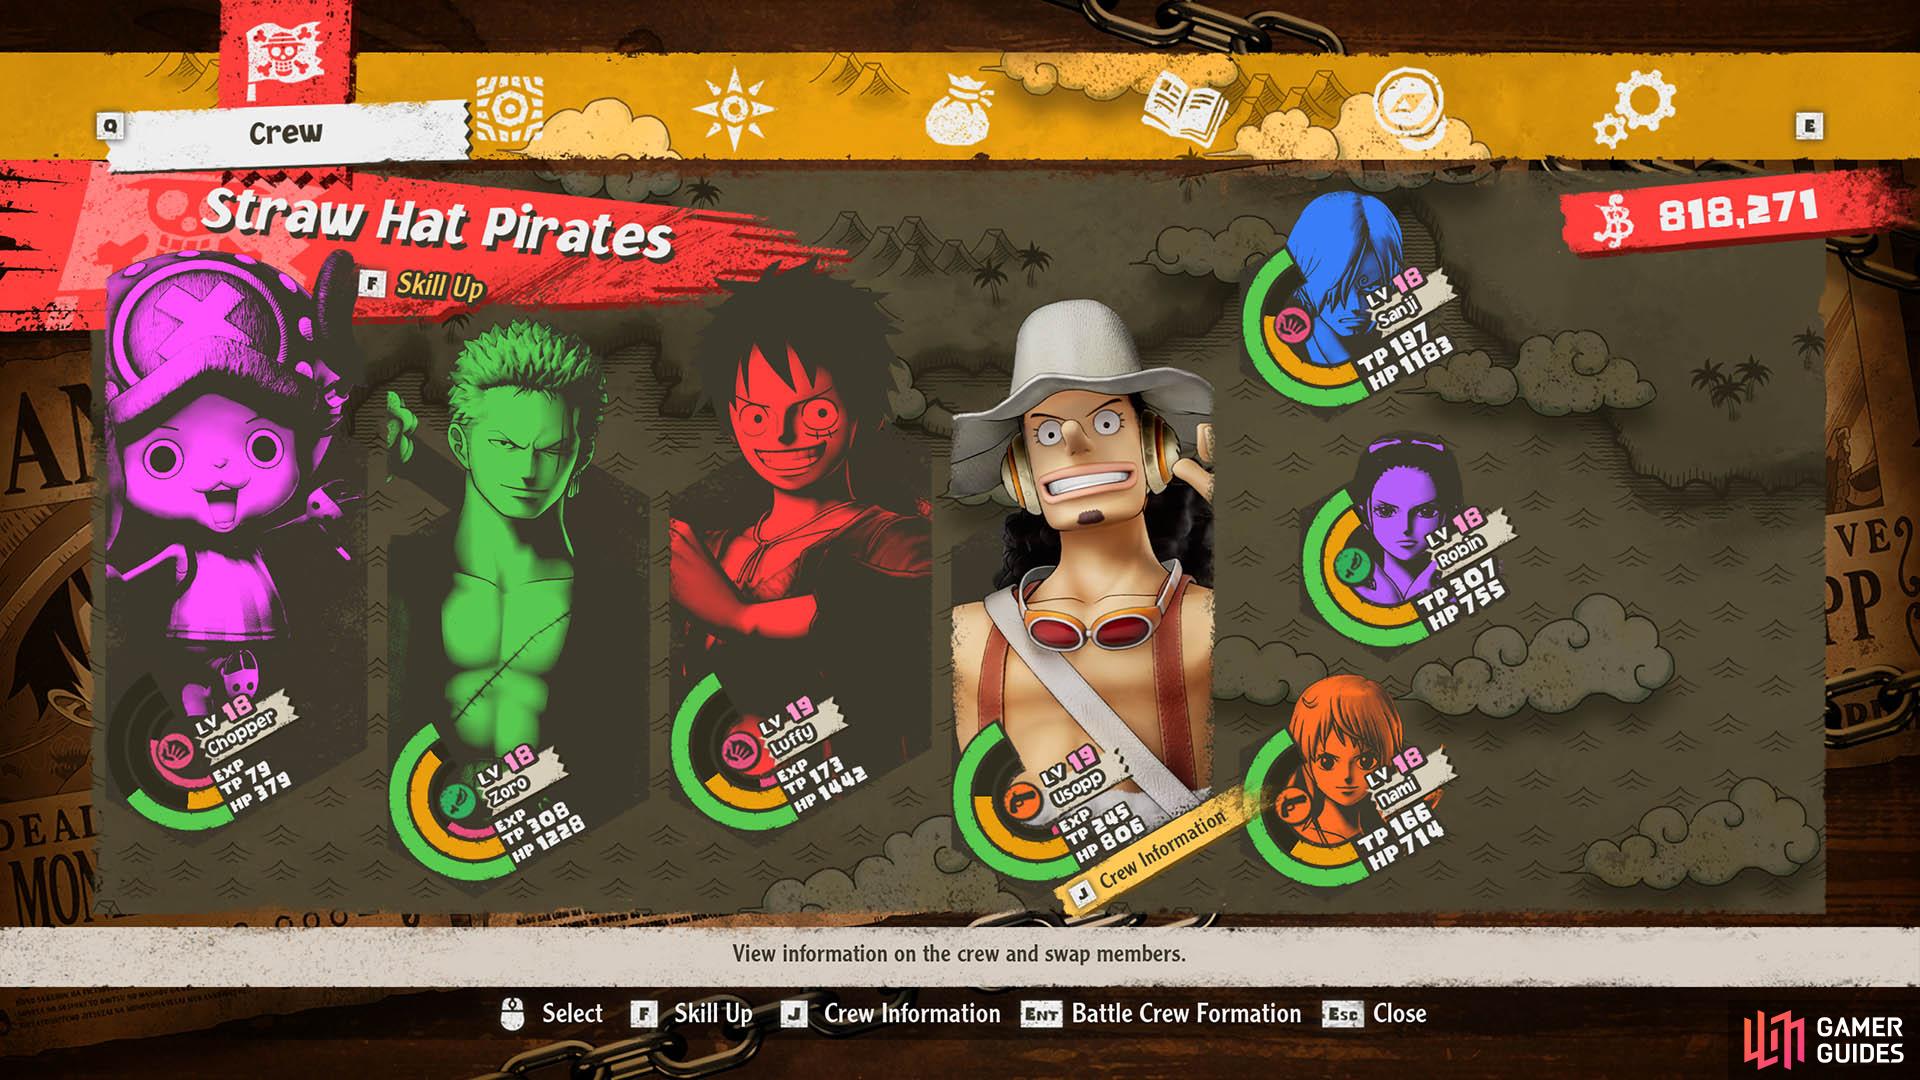 You can also see the whole party's current level from the main crew screen.